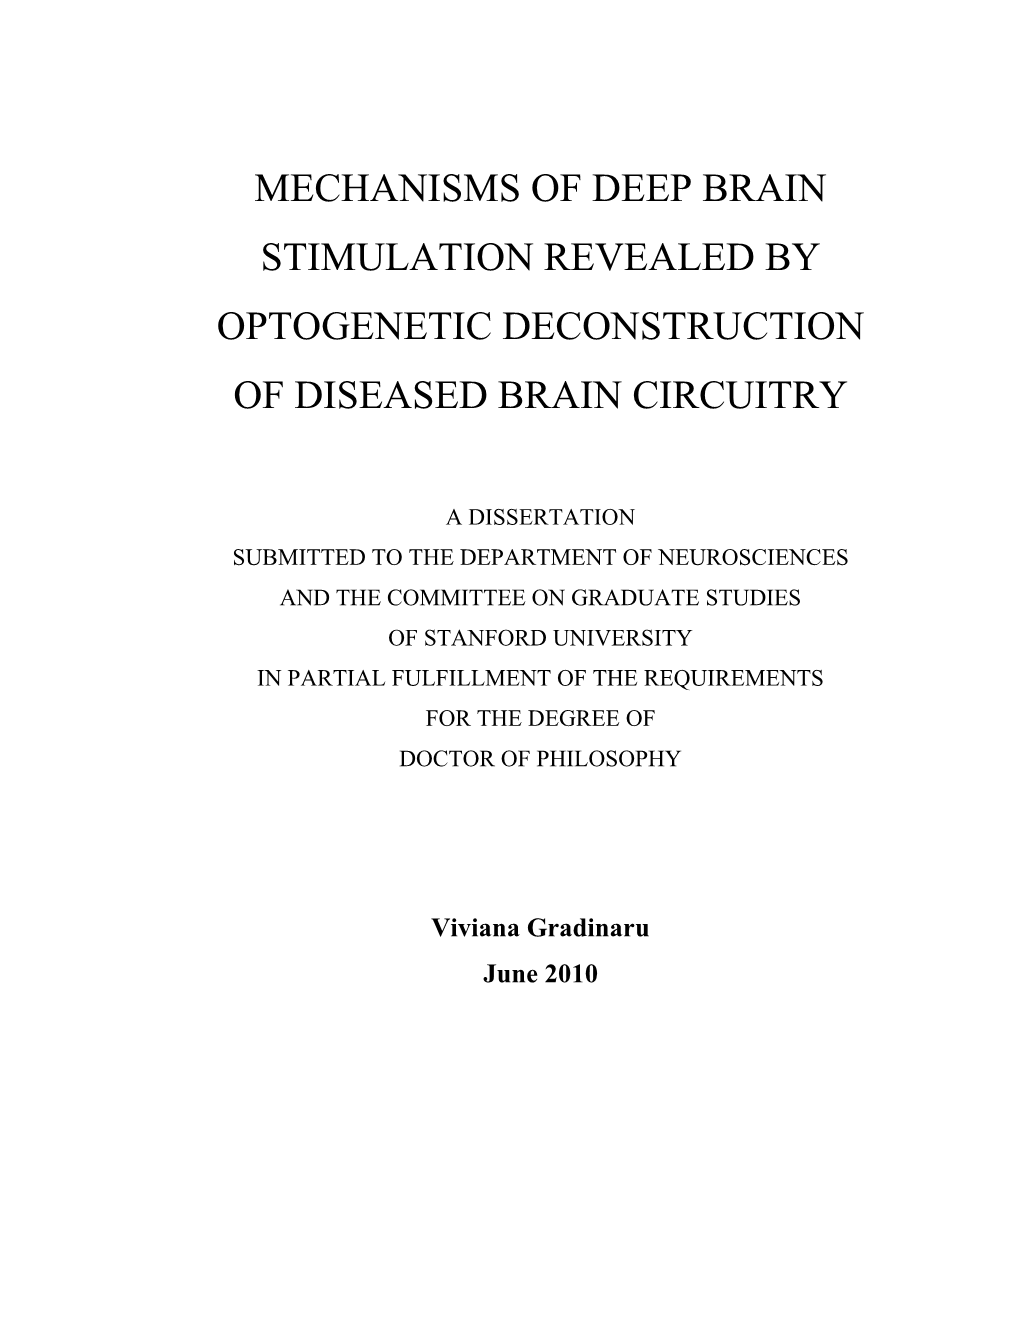 Mechanisms of Deep Brain Stimulation Revealed by Optogenetic Deconstruction of Diseased Brain Circuitry